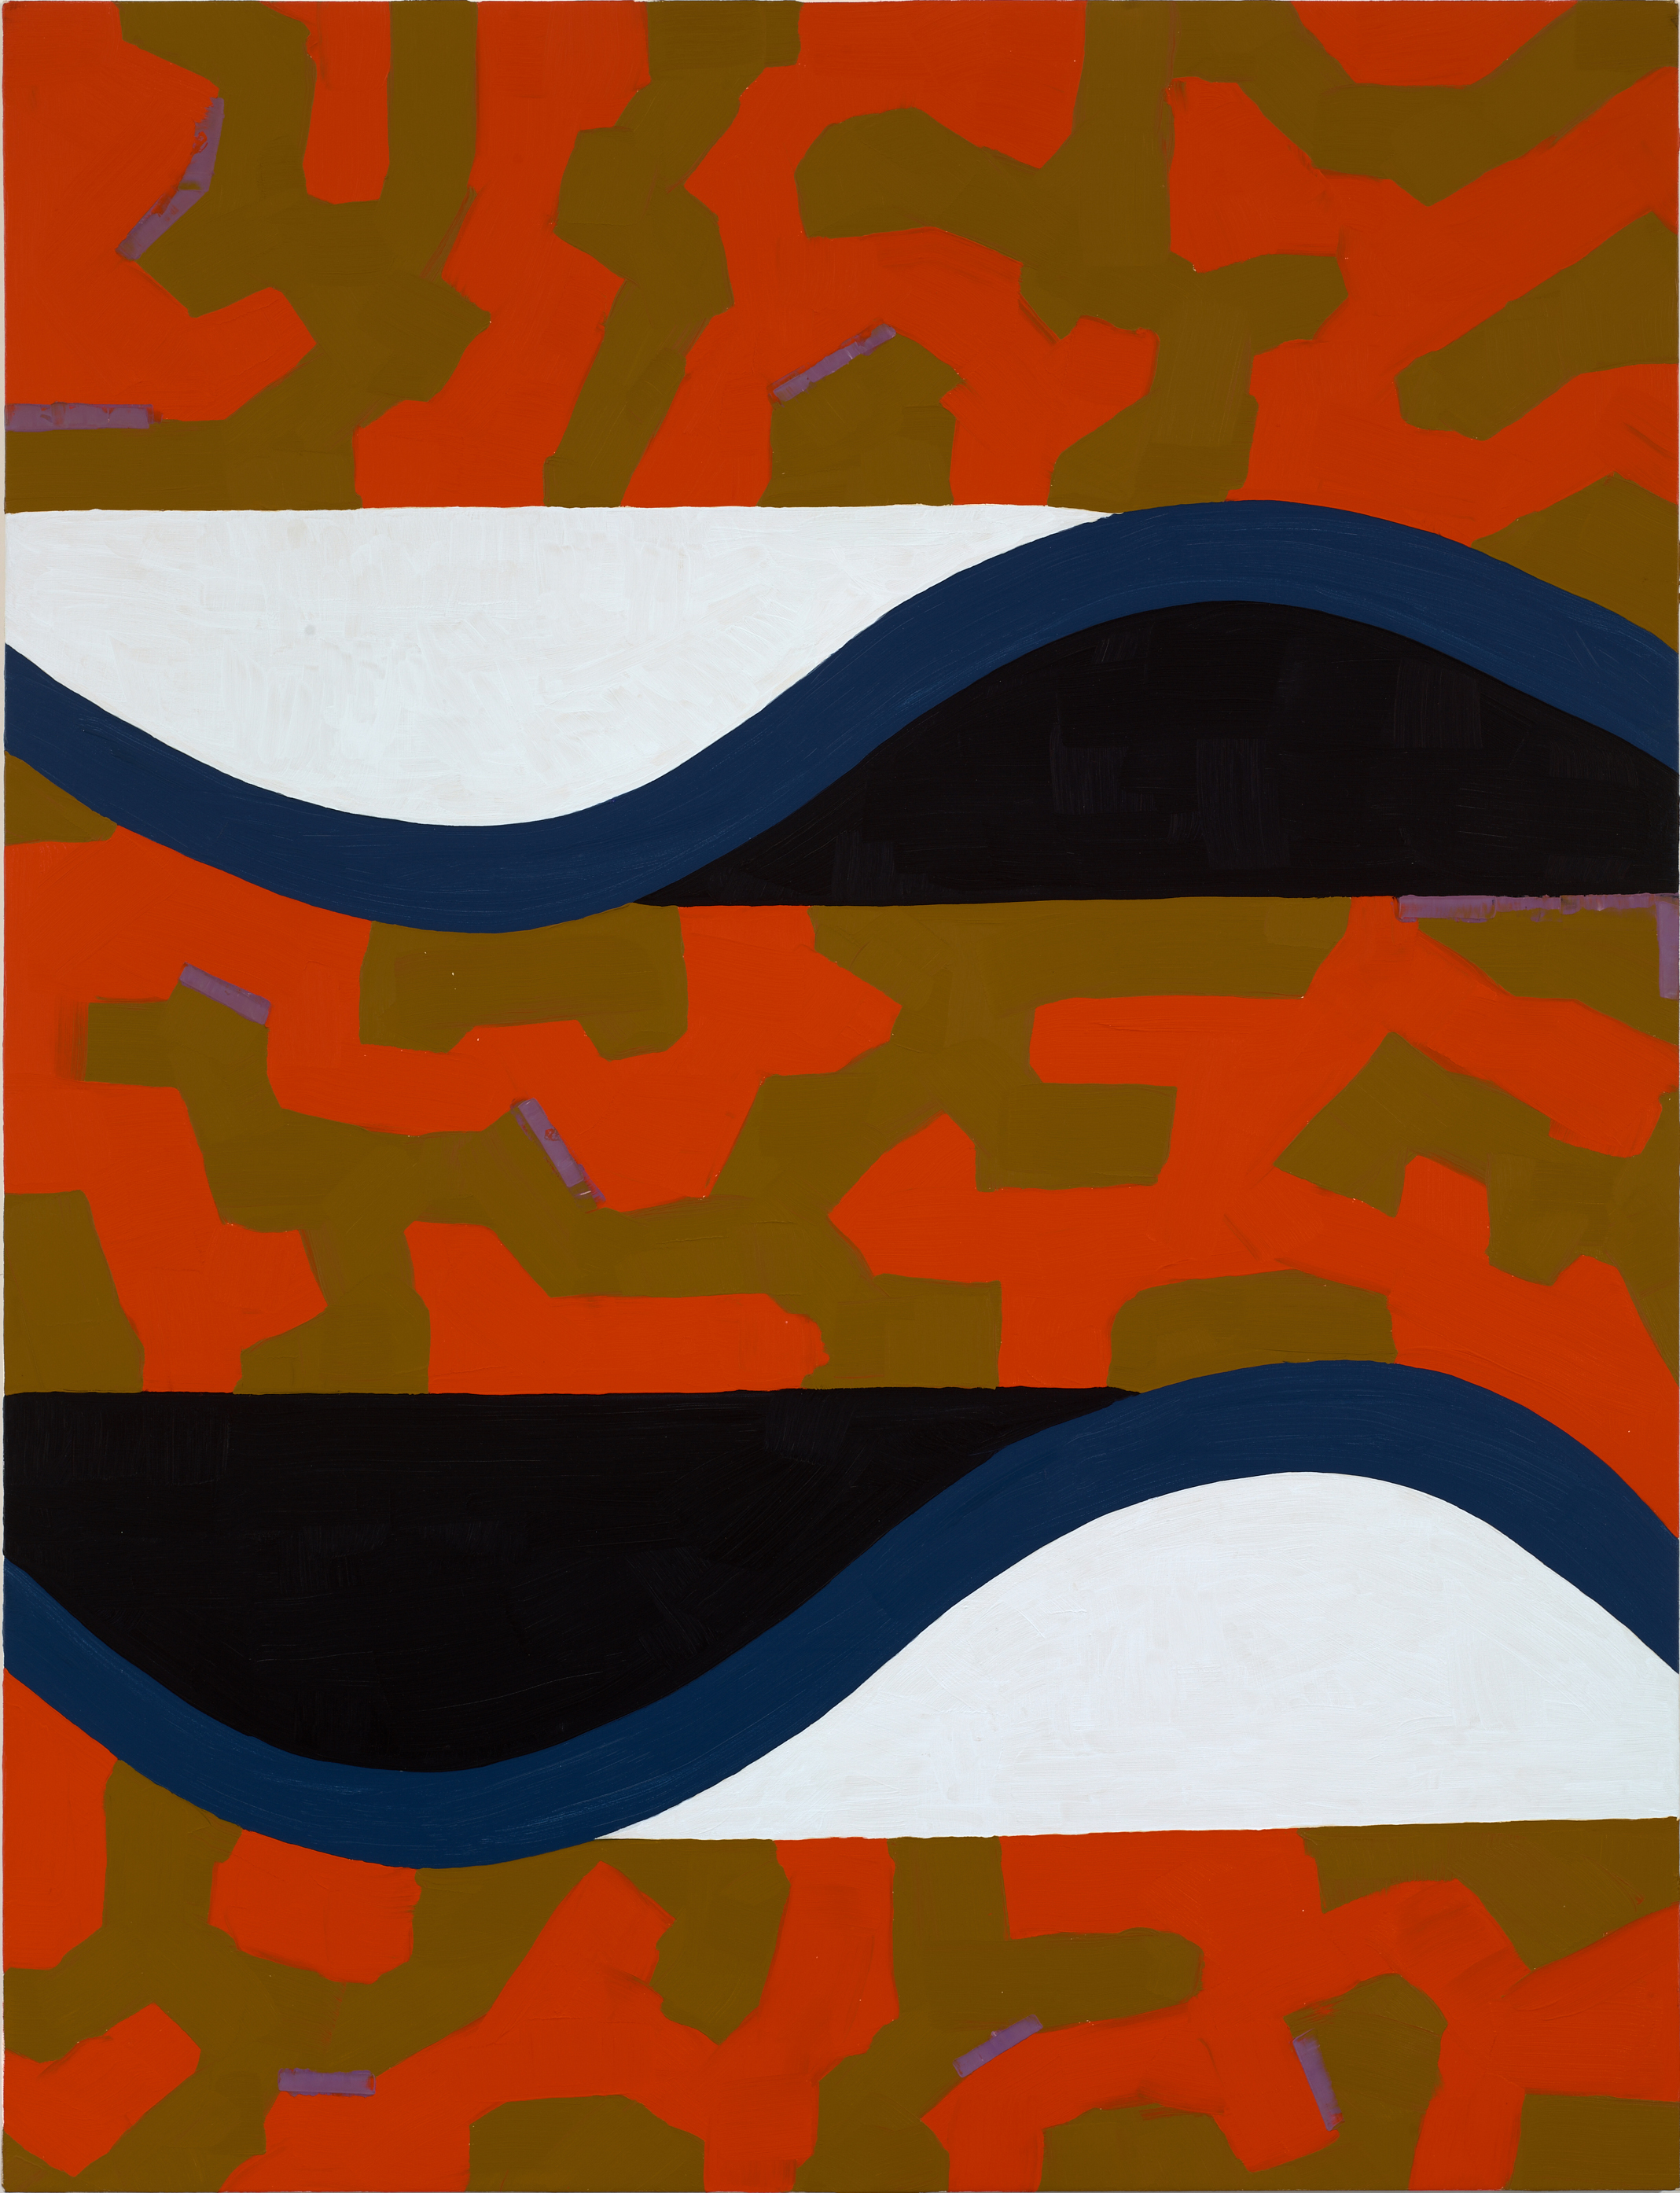 Coming Apart, 1989-90, oil on canvas, 68 x 52 inches